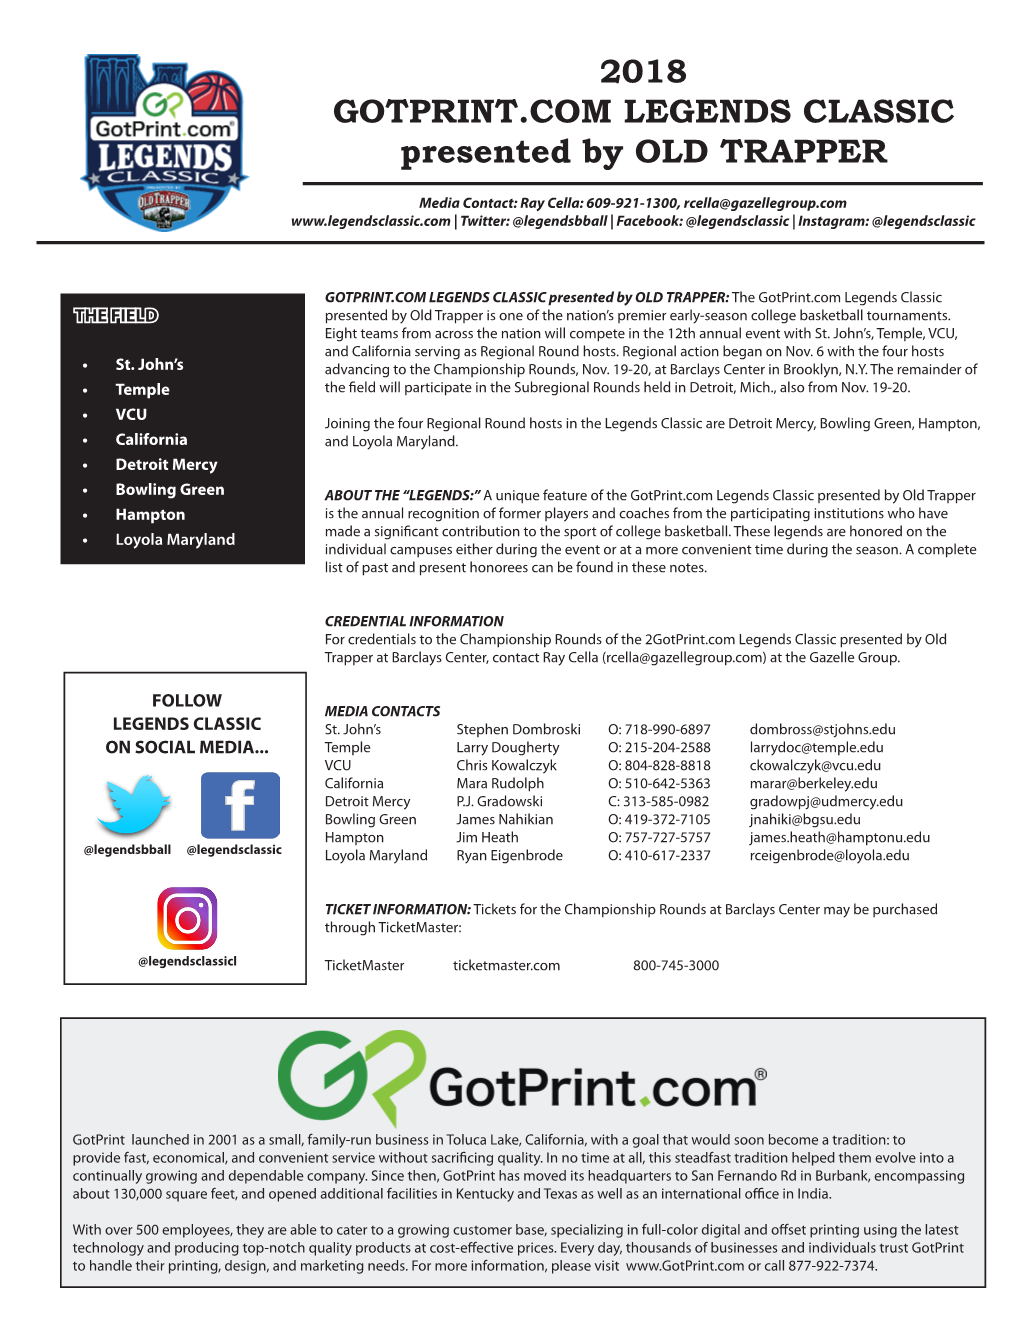 2018 GOTPRINT.COM LEGENDS CLASSIC Presented by OLD TRAPPER